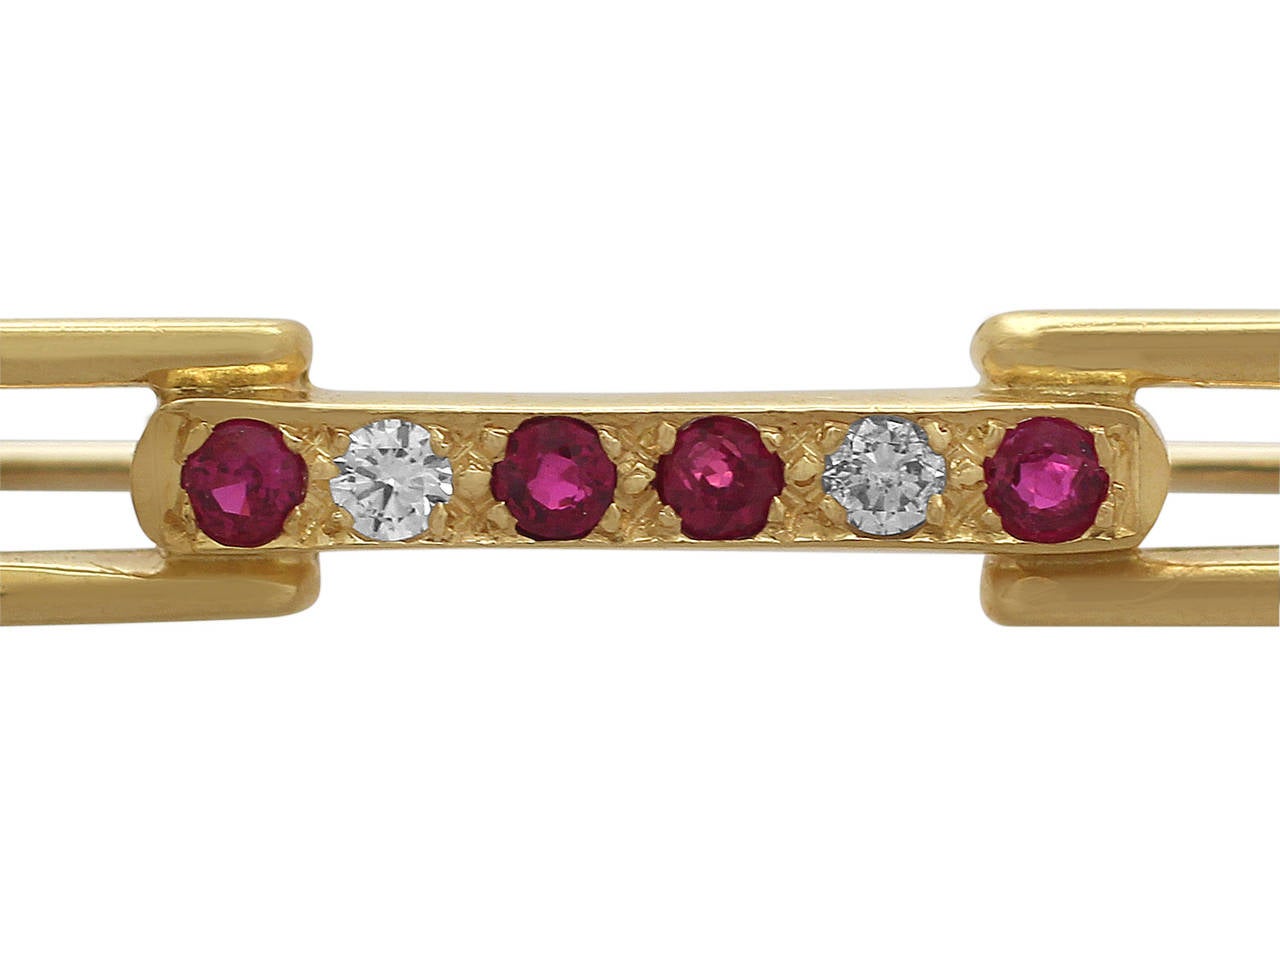 An Art Deco style 18 karat yellow gold, 0.12 carat ruby and 0.04 carat diamond brooch; part of our vintage jewelry and estate jewelry collections.

This vintage Art Deco brooch has been crafted in 18k yellow gold.

The central bar of the